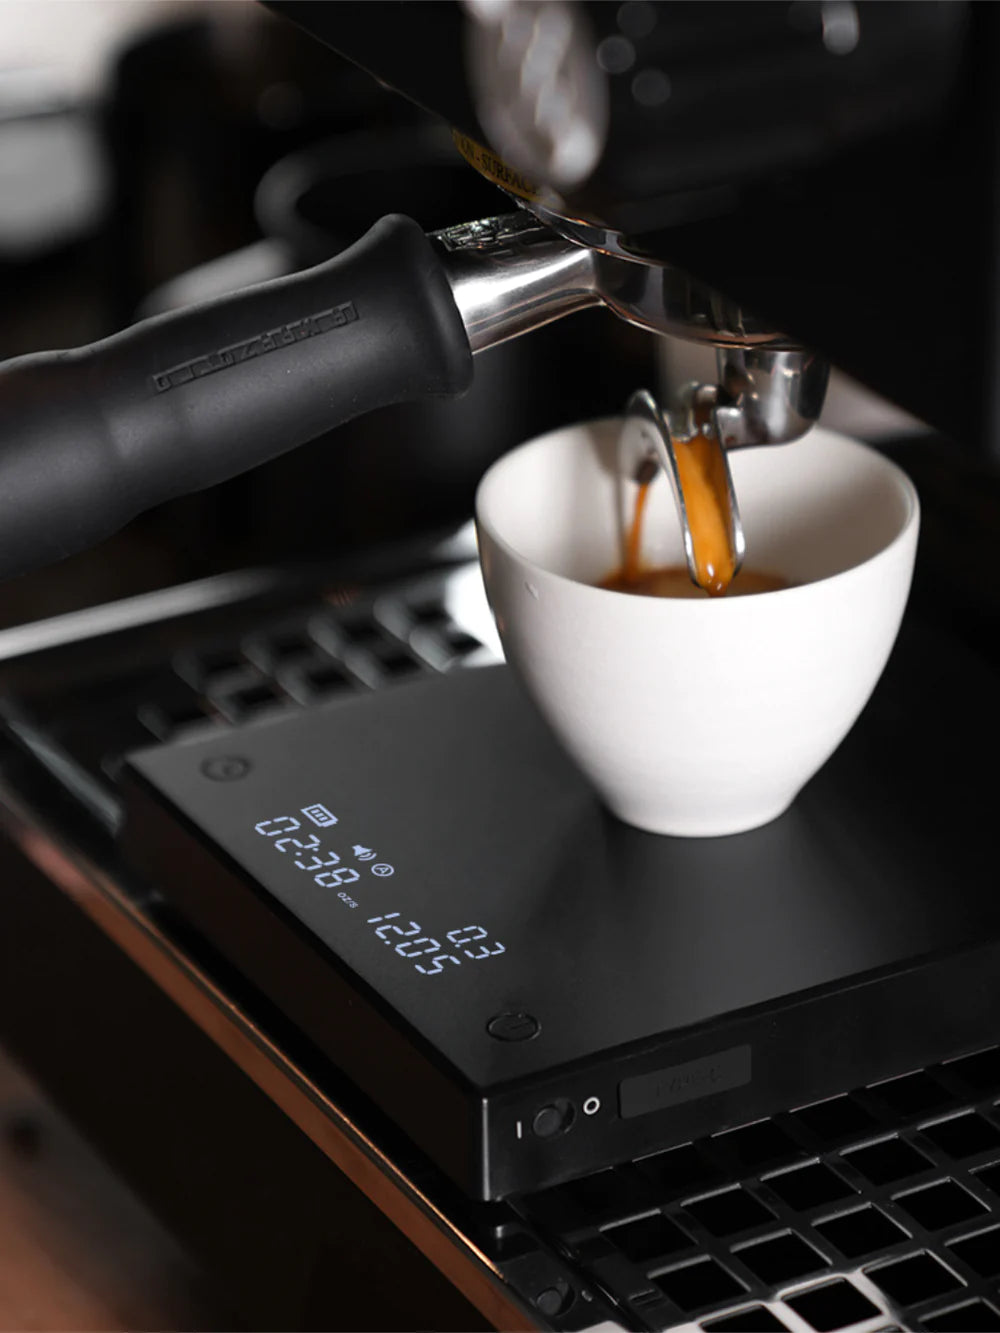 Timemore Black Mirror BASIC 2 Coffee Scale - Image 6